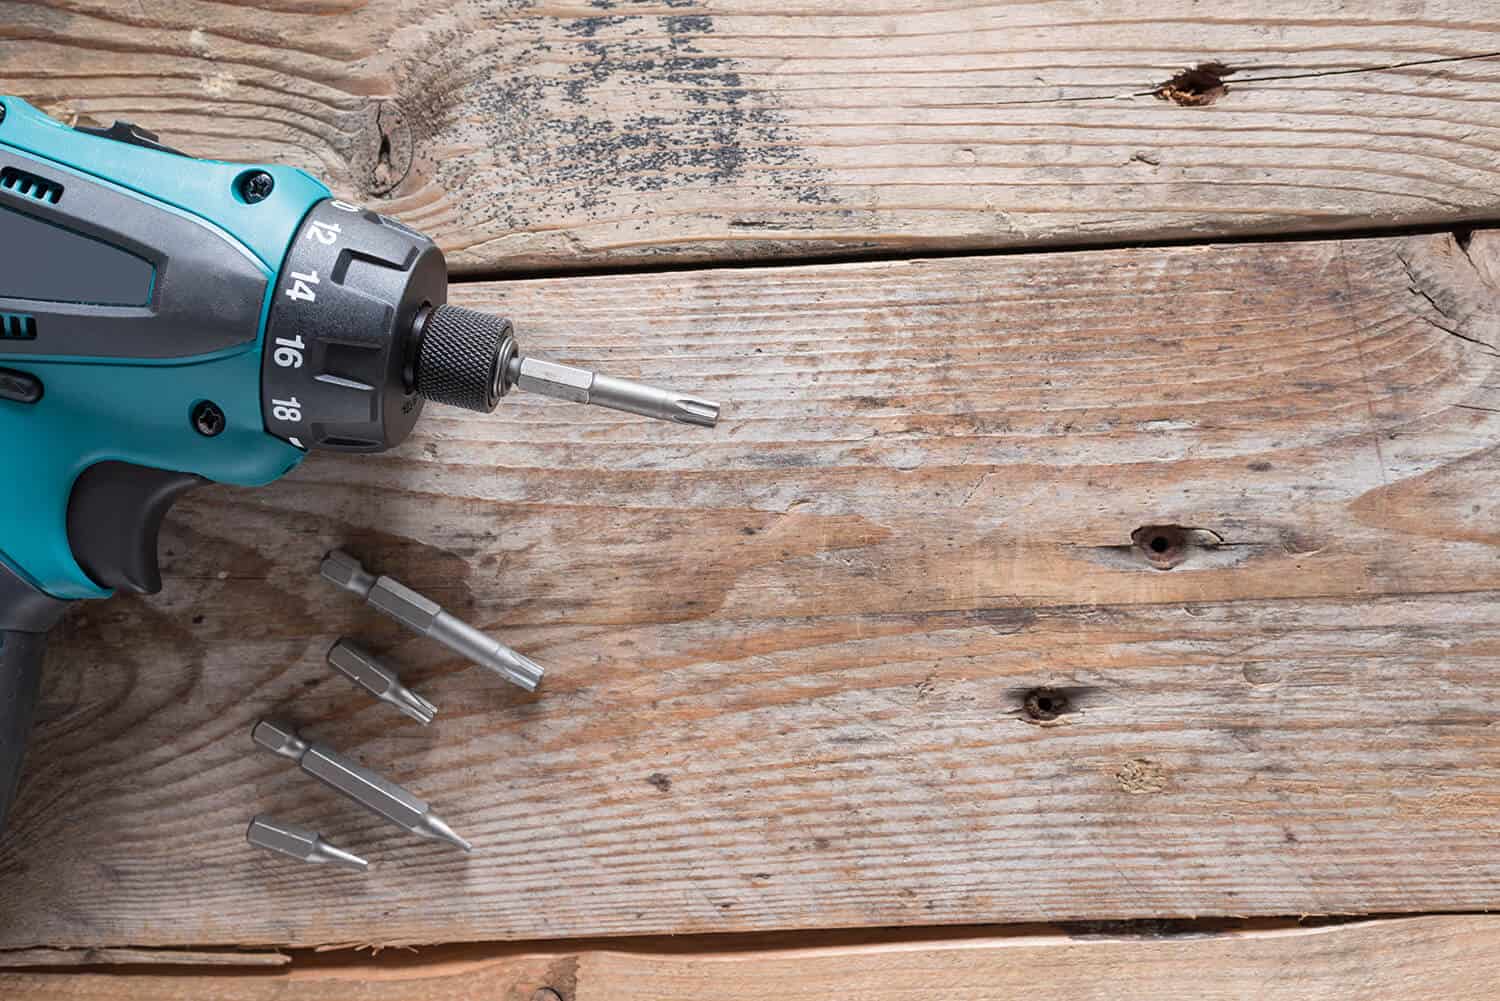 How Does an Impact Driver Compare to a Cordless Drill Driver